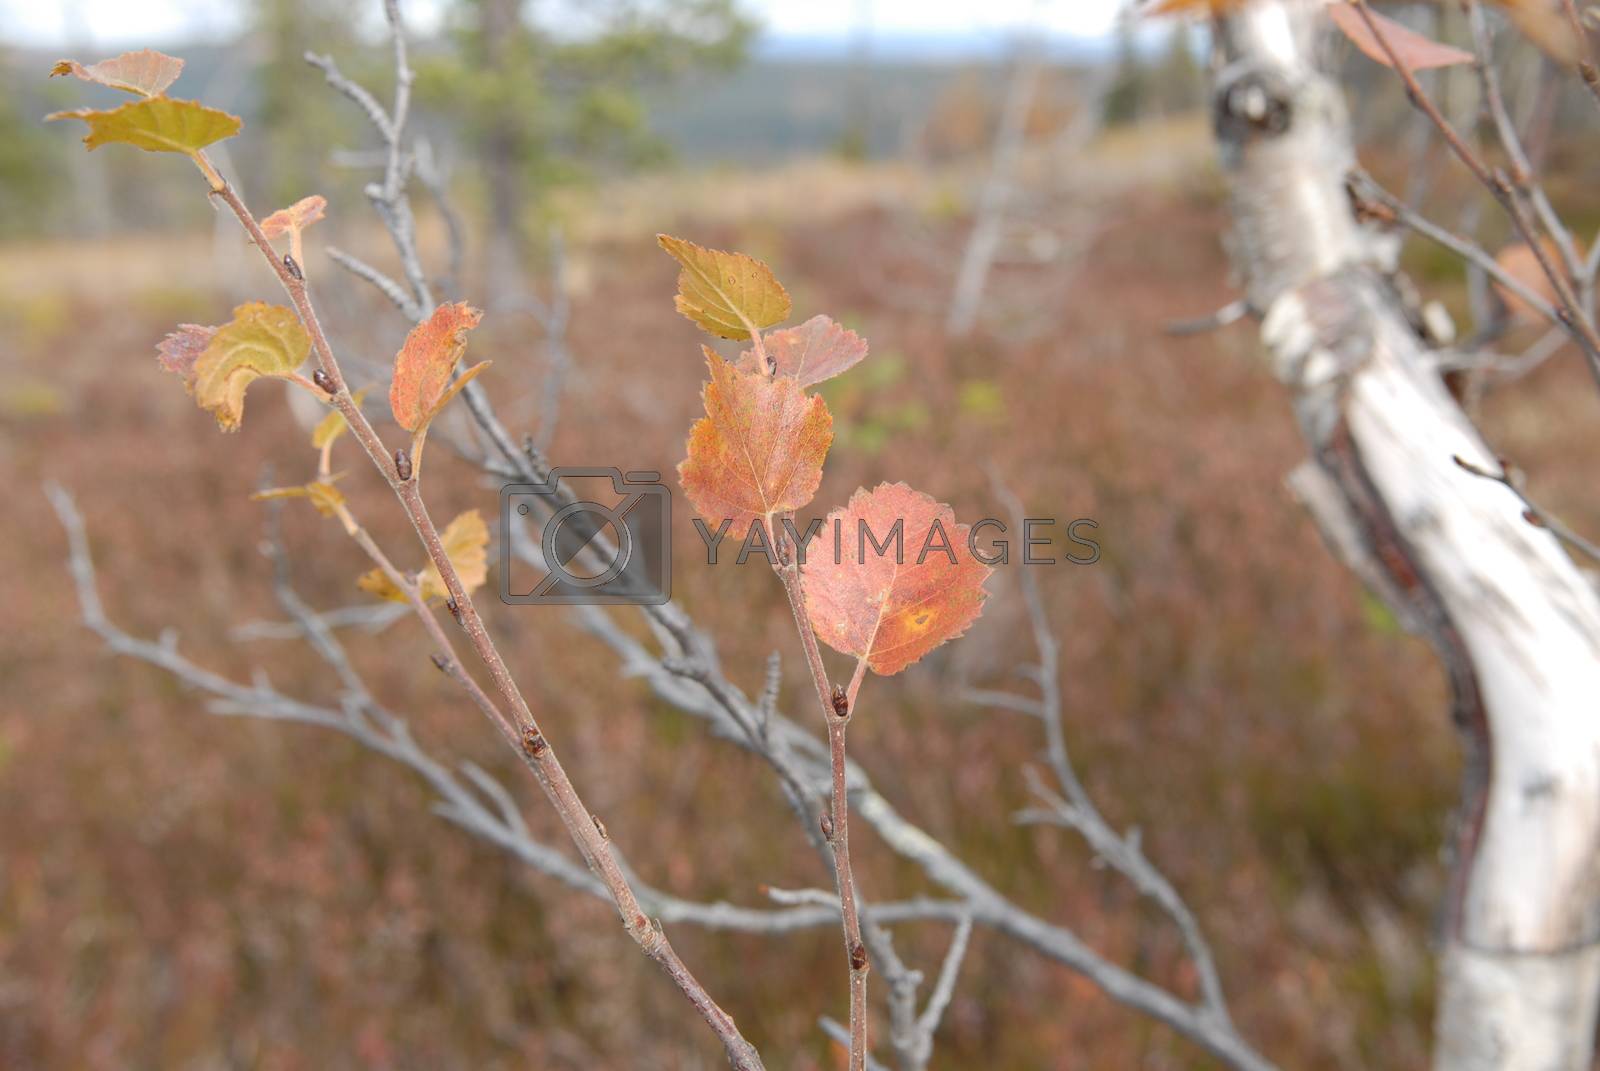 Royalty free image of Autumn leaf in the mountain by Bildehagen